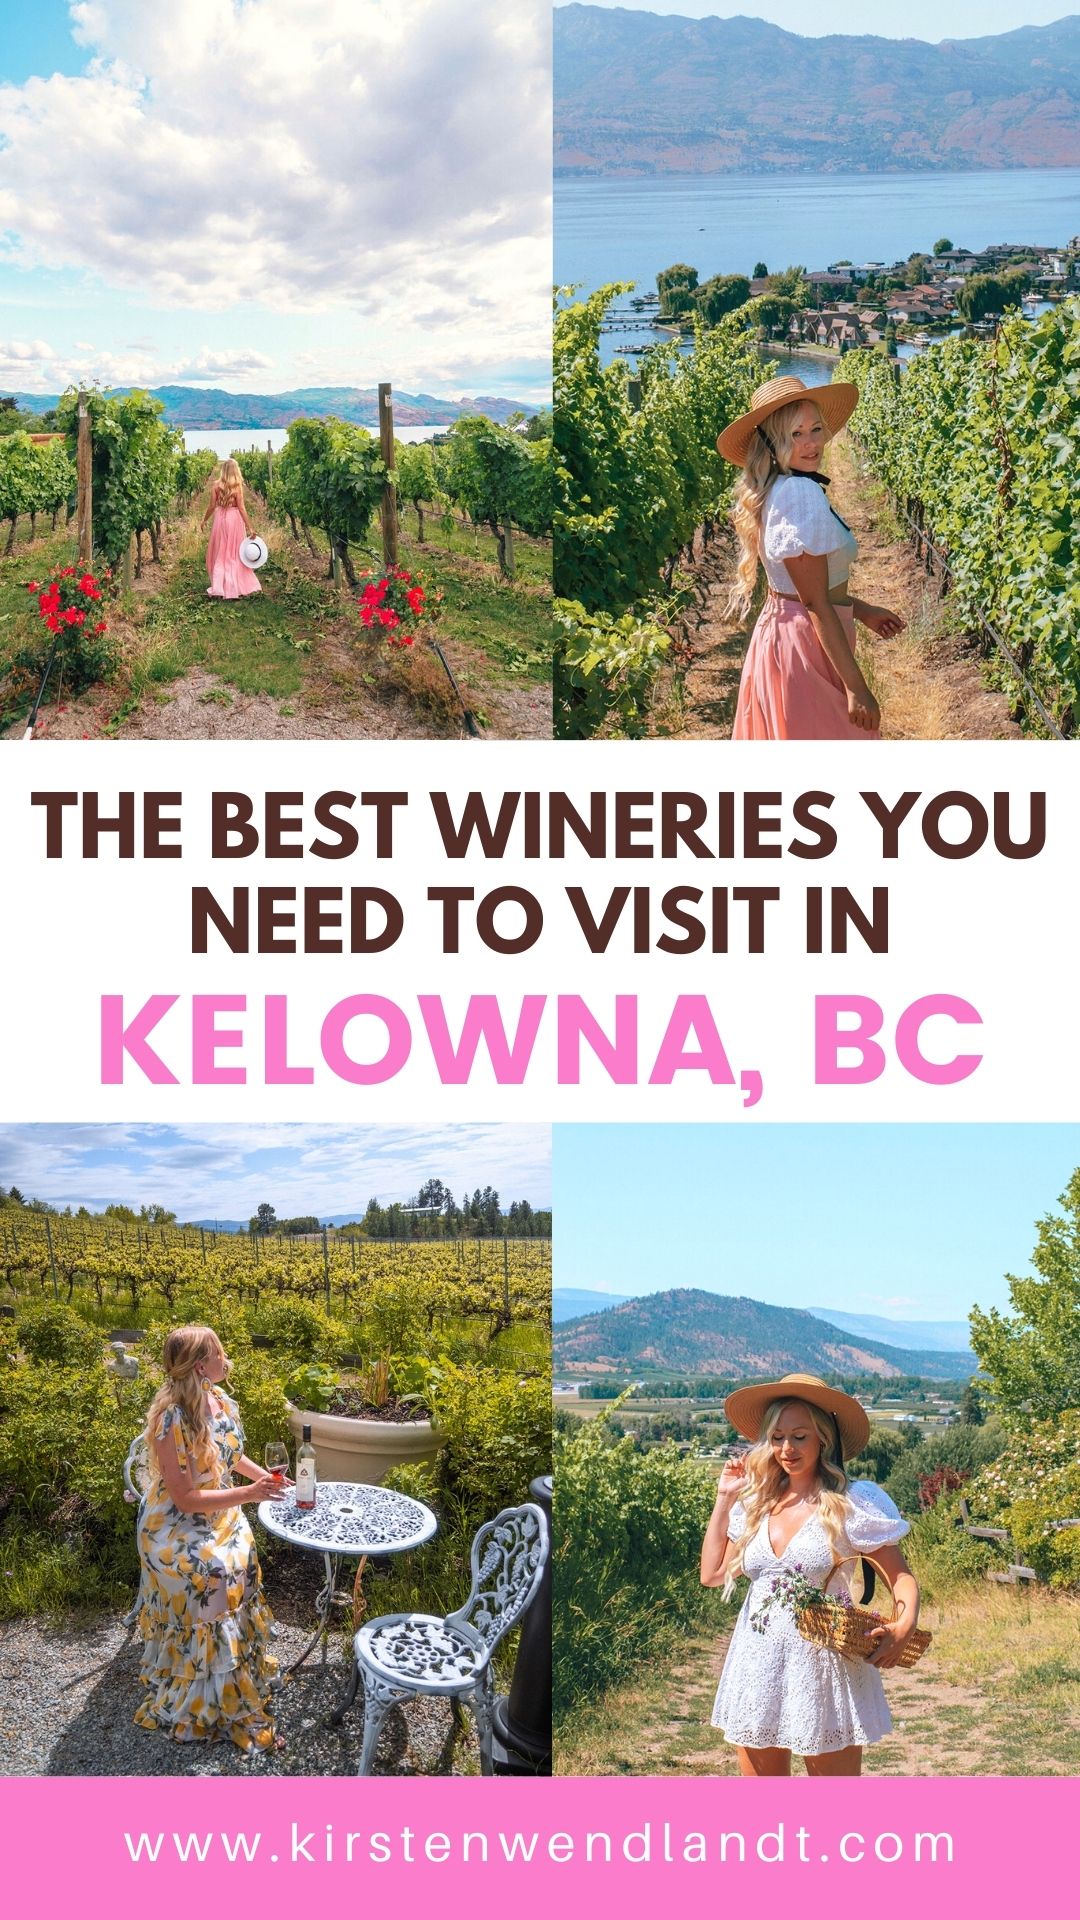 If you're heading to the Okanagan soon and planning on spending time in Kelowna, you don't want to miss this guide to the best wineries in Kelowna! From organic wineries to wineries with the best view, this guide will help you plan your visit to Kelowna’s incredible wine region.